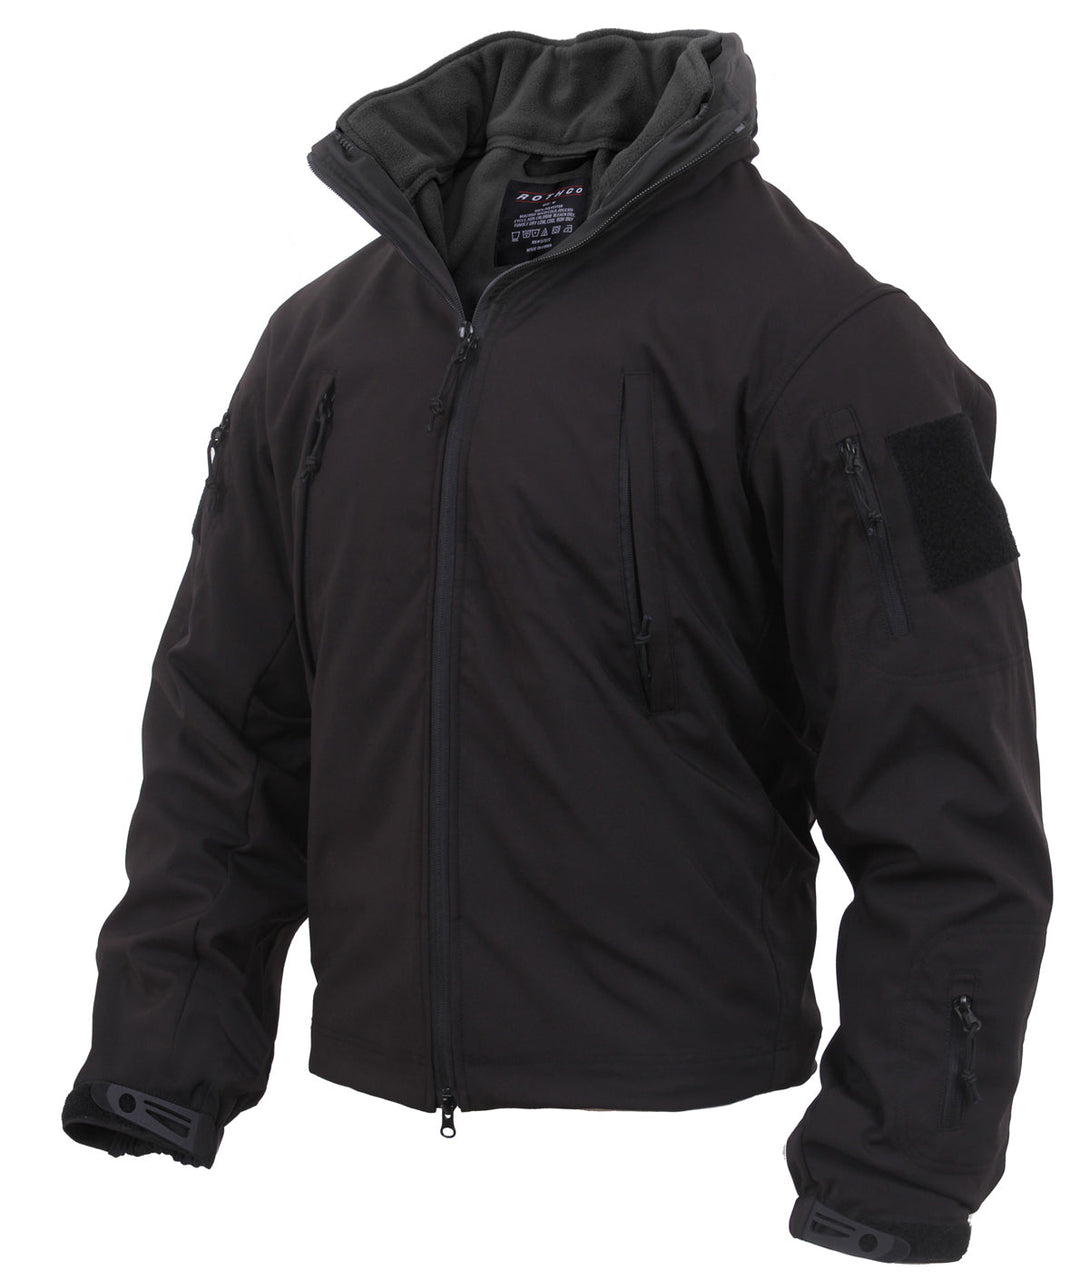 Rothco Mens 3-in-1 Special Ops Soft Shell Jacket